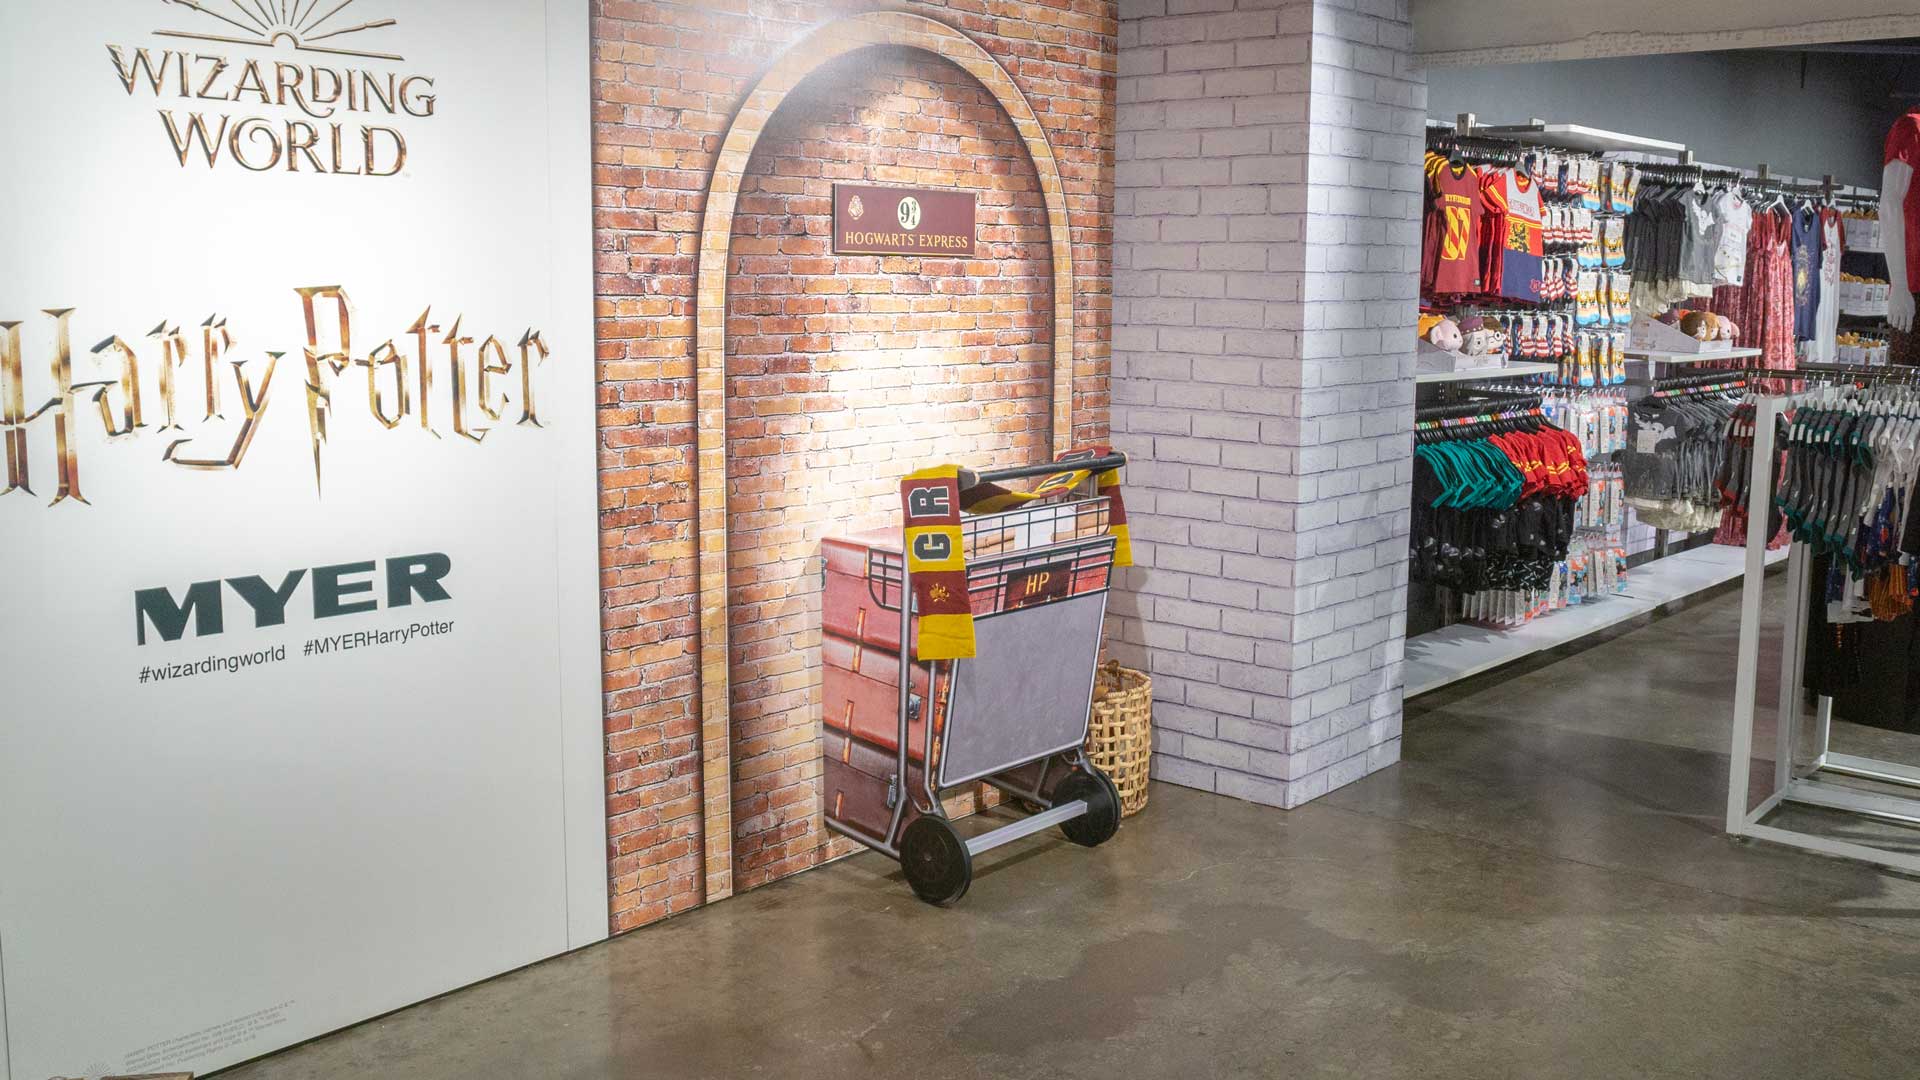 Australia's Biggest Harry Potter Store Has Opened in Melbourne